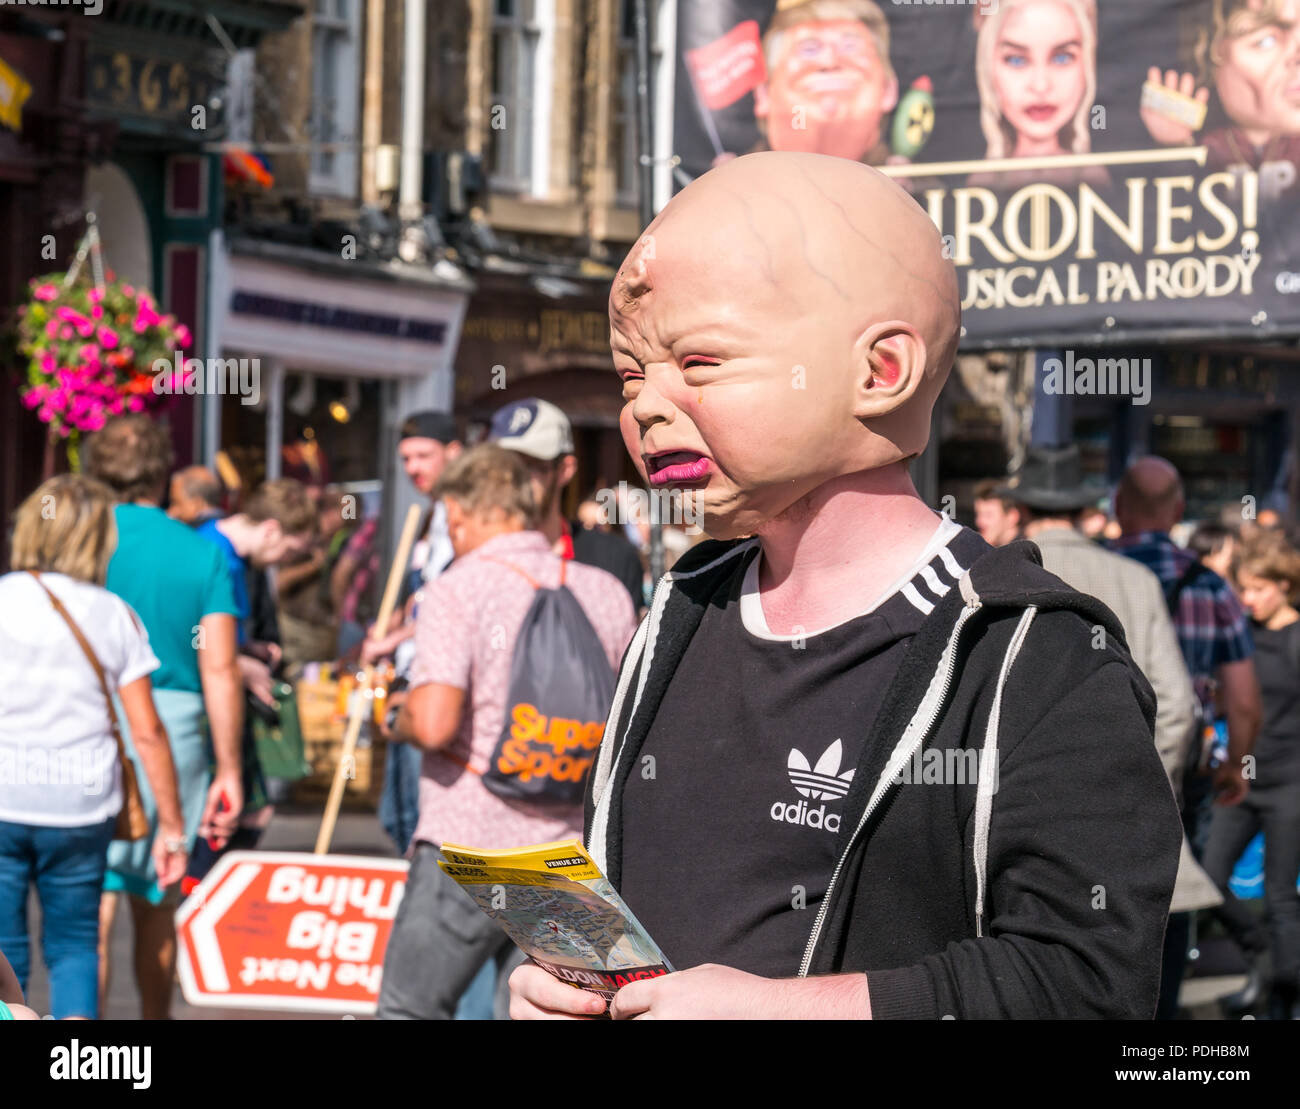 Edinburgh, Scotland, UK. 9th August 2018. Edinburgh Fringe Festival, Royal Mile, Edinburgh, Scotland, United Kingdom. On a sunny festival day the Virgin Money sponsored street festival is packed with people and fringe performers. A Fringe performer wearing a gruesome baby head interacts with pedestrians handing out flyers Stock Photo